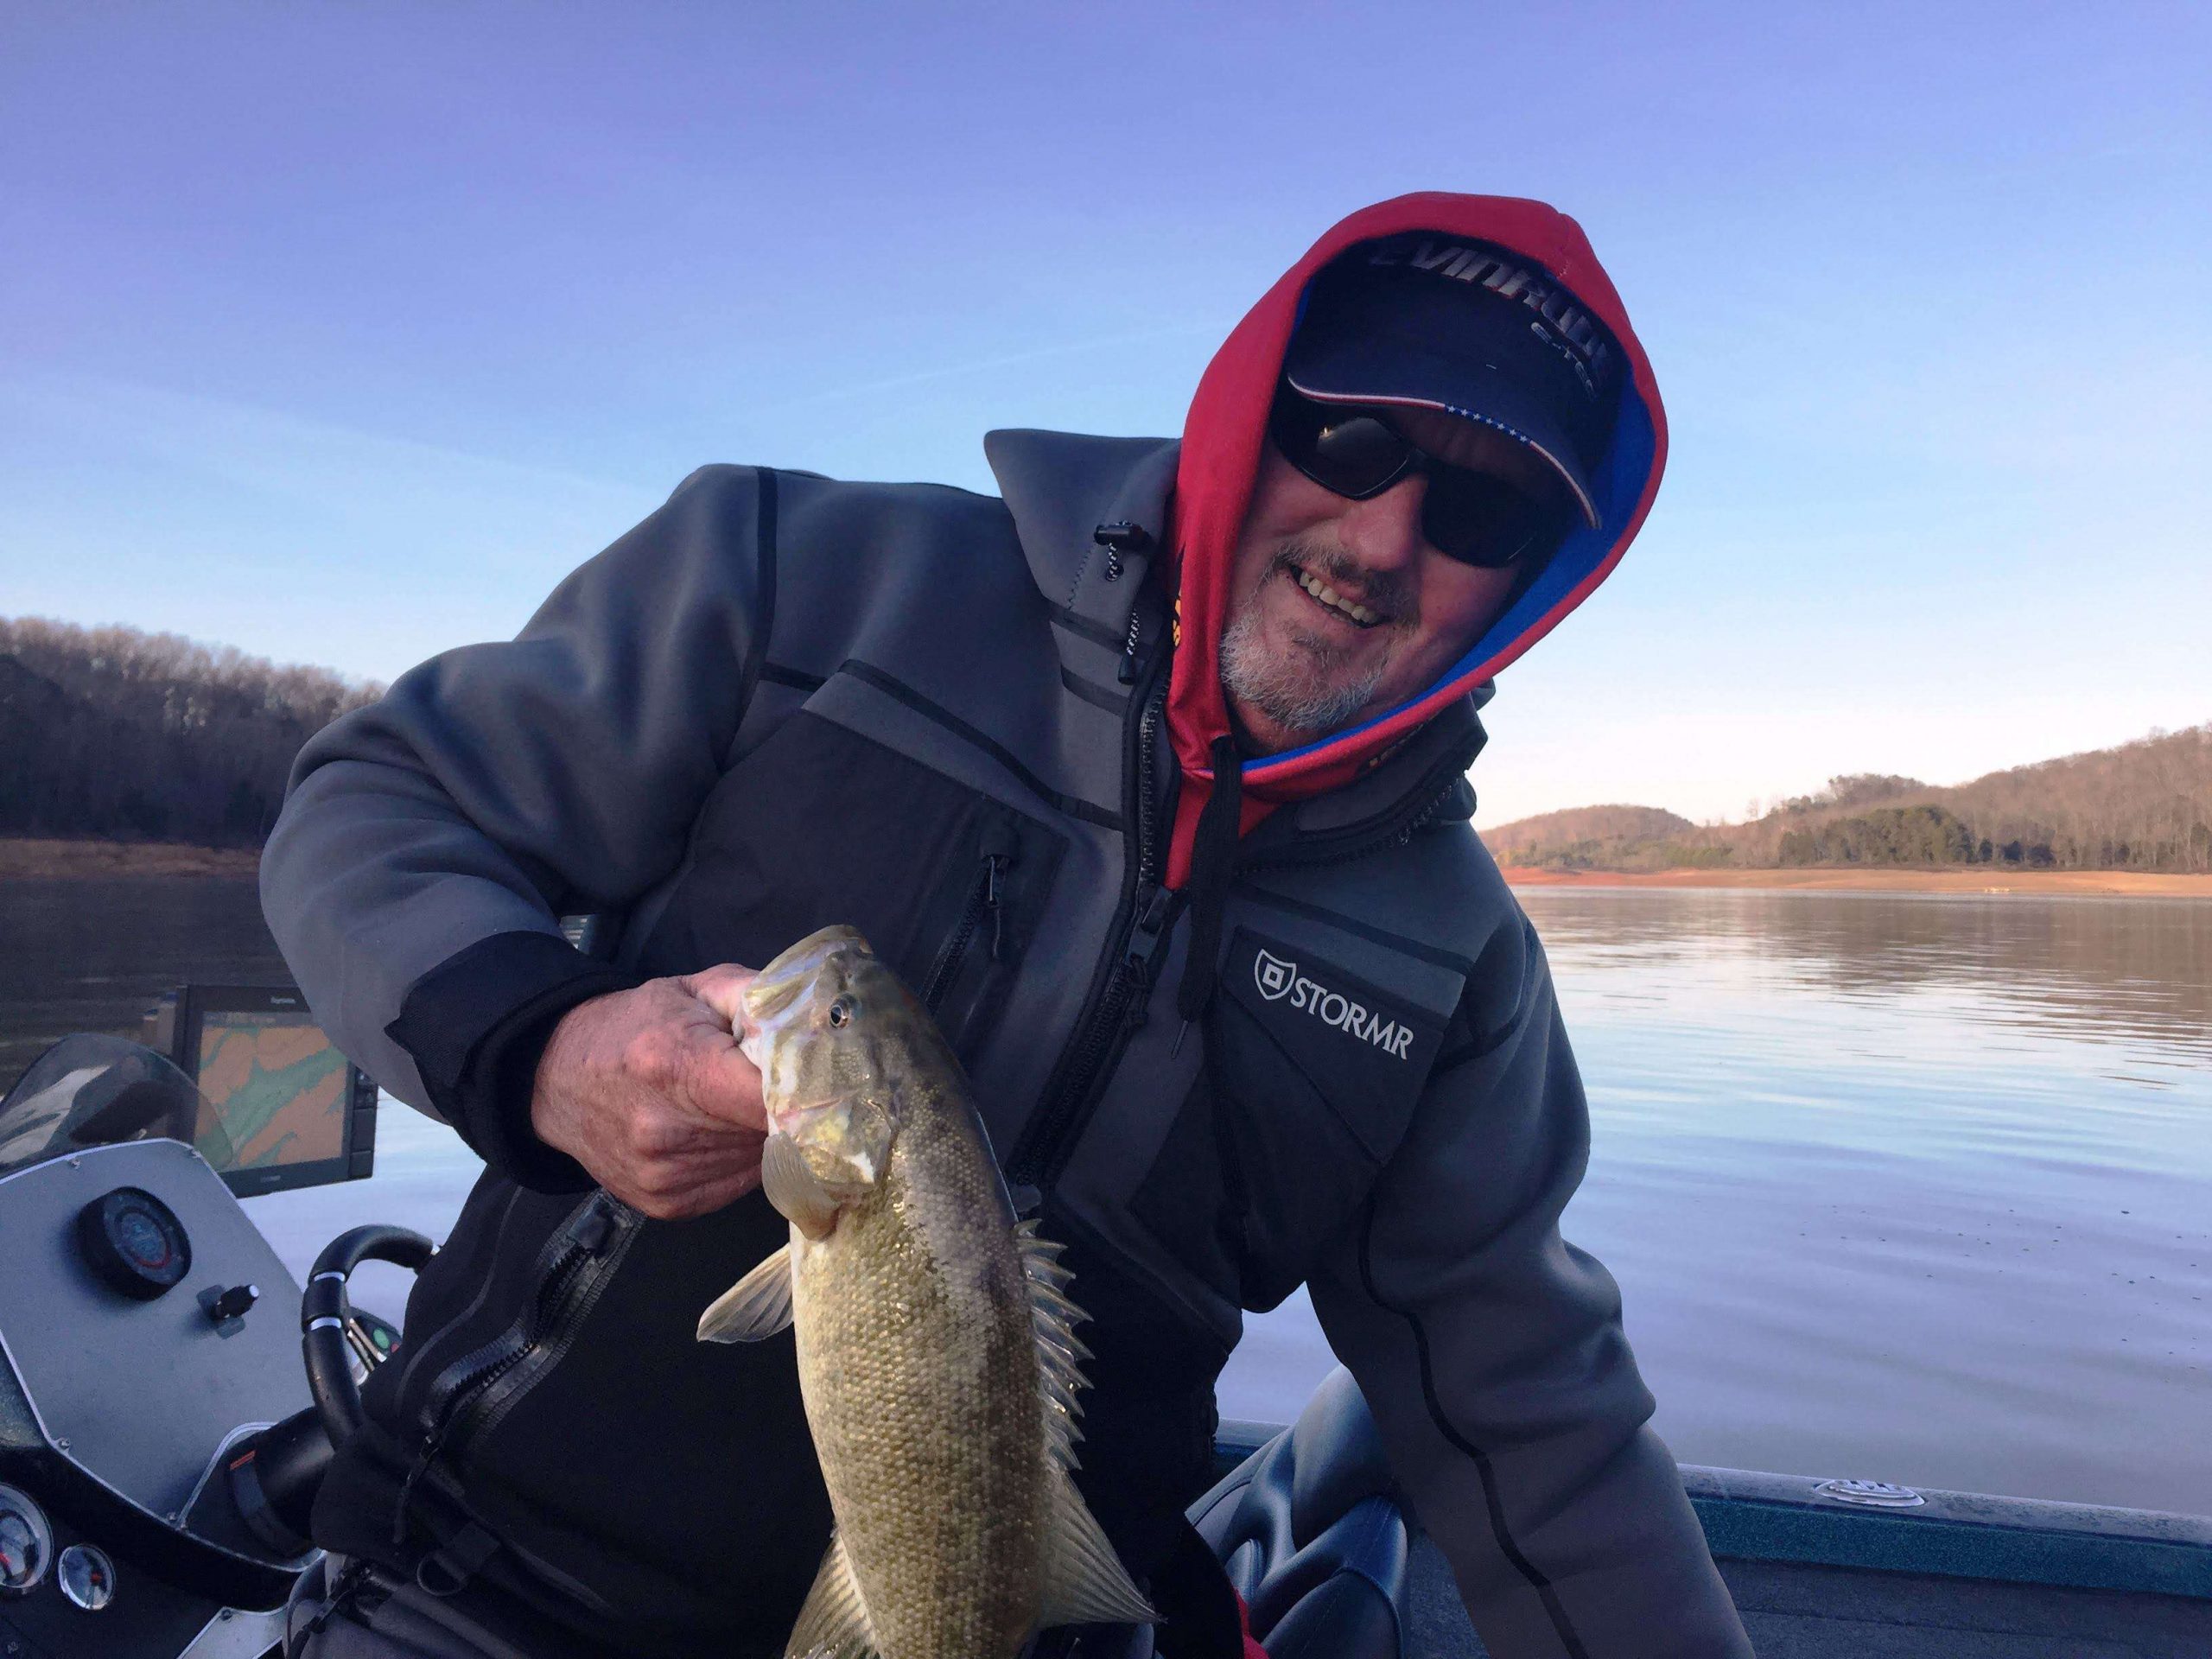 David Fritts is on the board. Fishing poles are freezing up, but that isn't slowing him down.